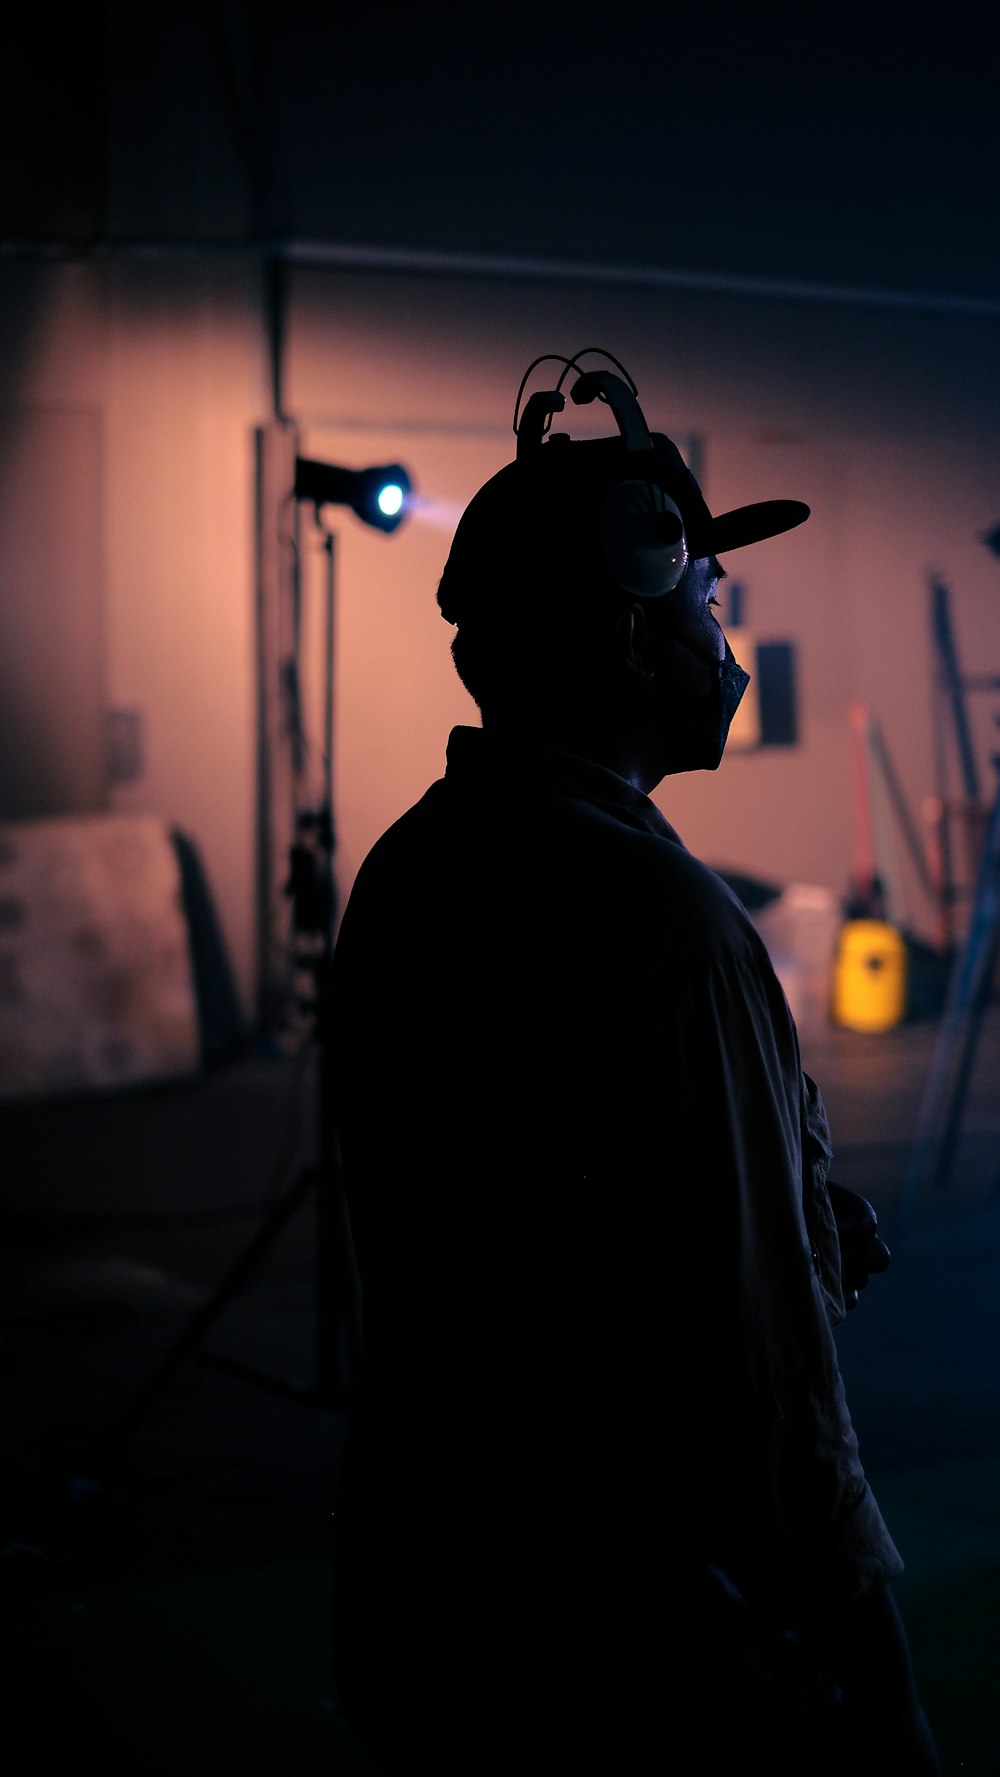 a man wearing a hat and glasses in a dark room